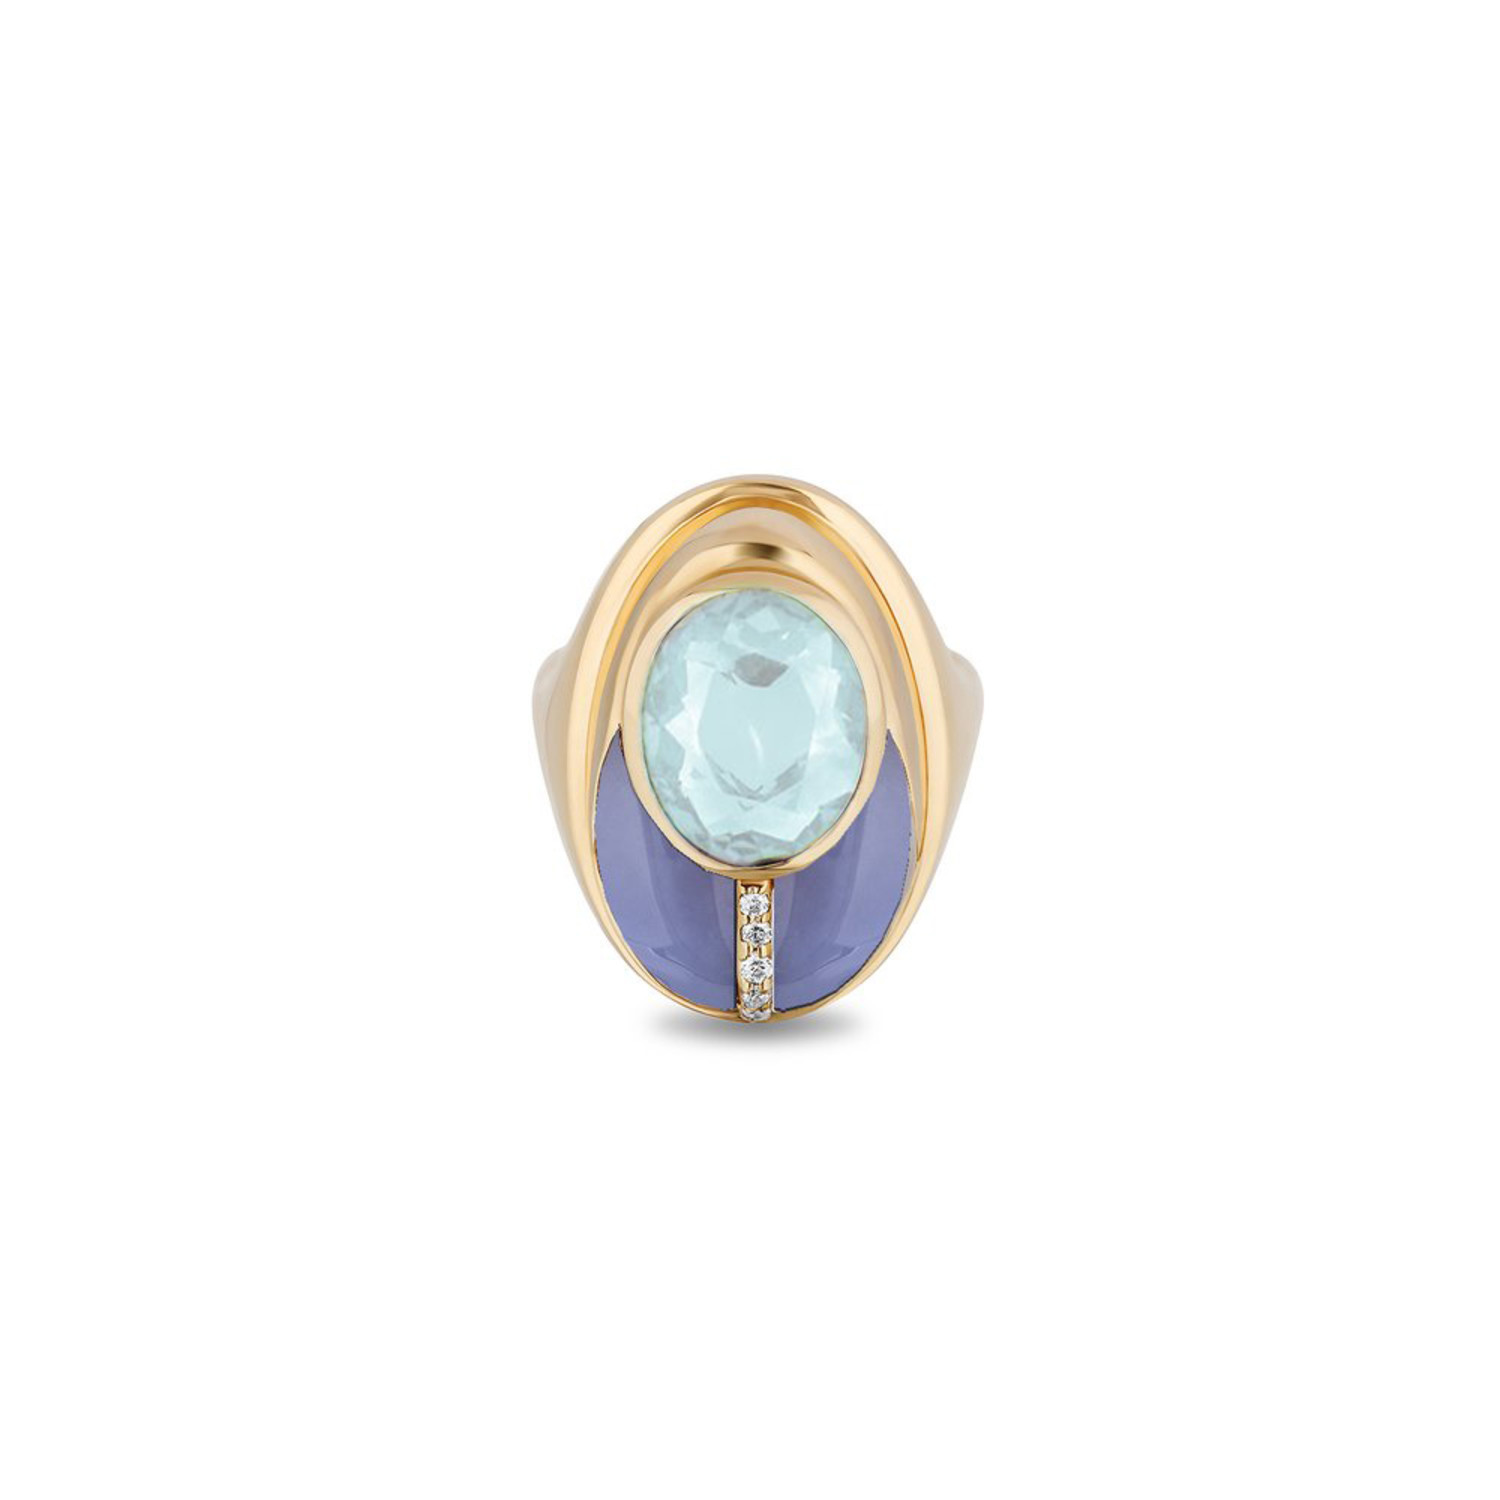 Aqua Topaz and Blue Chalcedony Love Bug Ring with Diamonds in 14K Yellow Gold